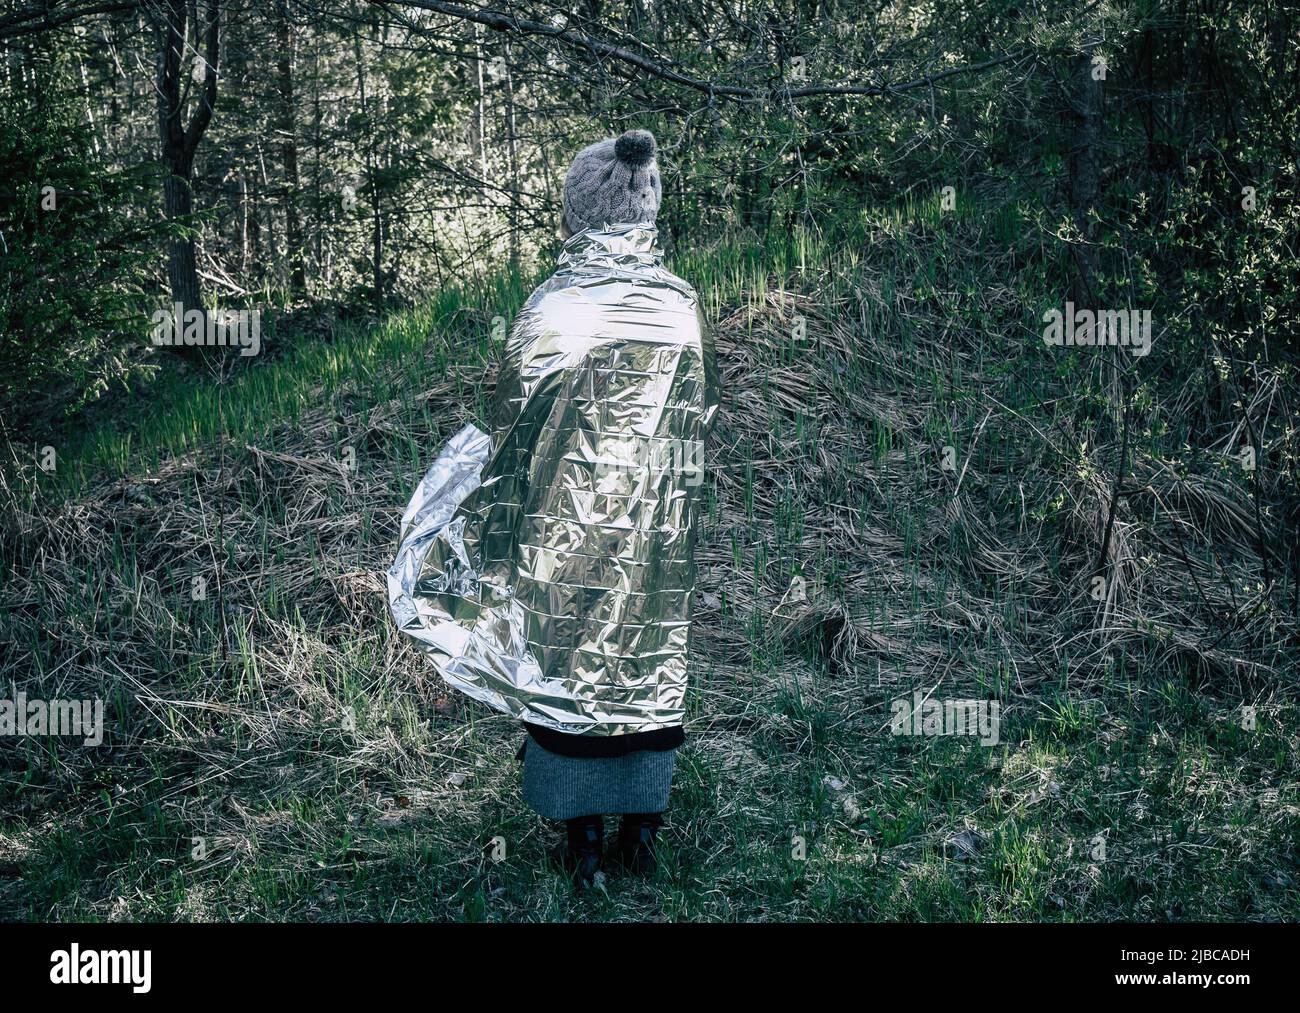 Woman person is lost and stand in wild forest in cold day, using first aid emergency blanket to prevent hypothermia and body heat loss. Stock Photo